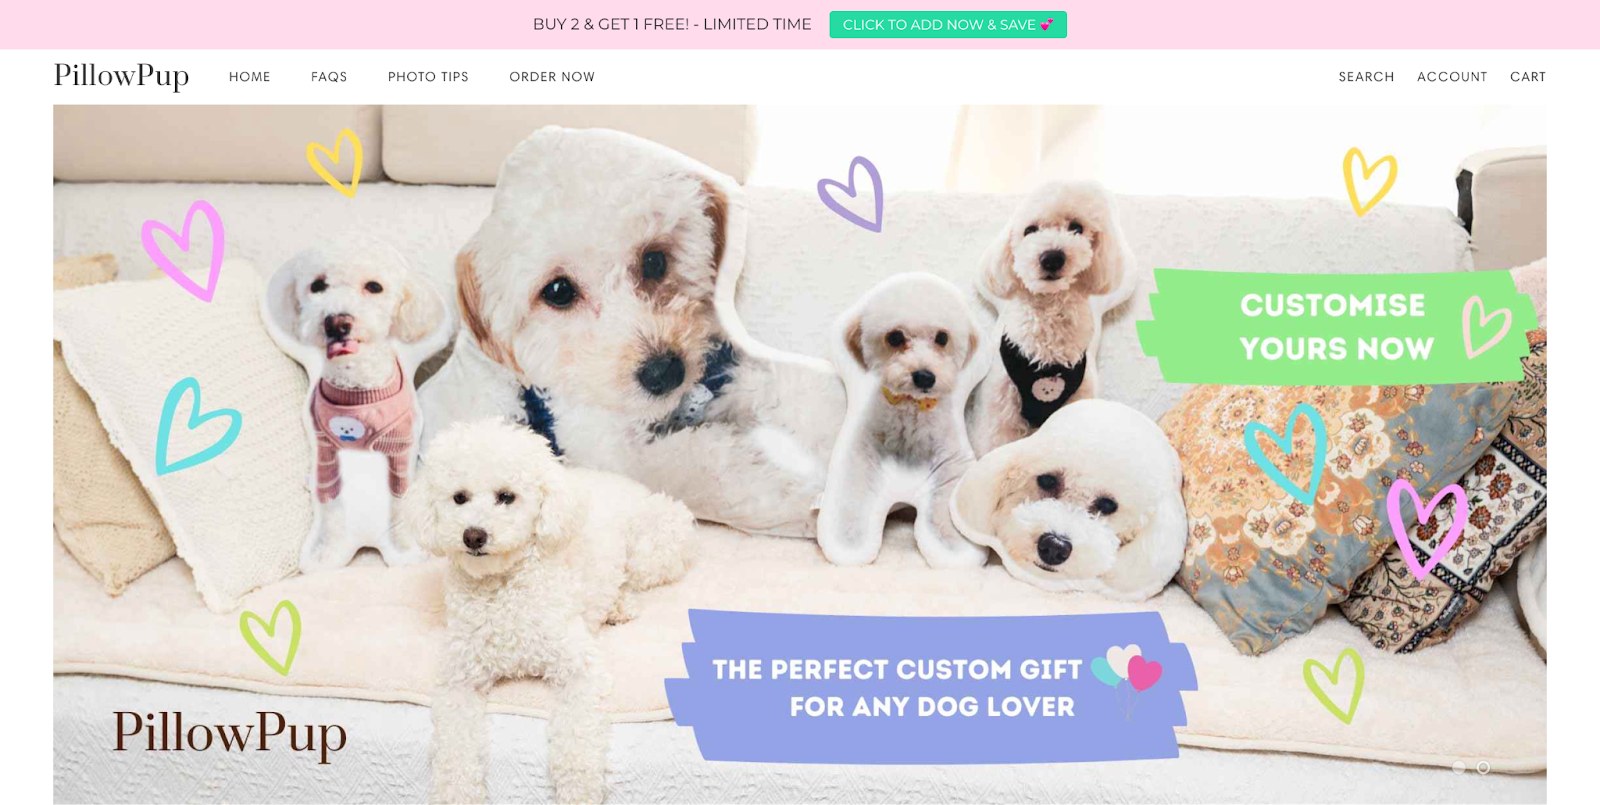 single product website example: PillowPup